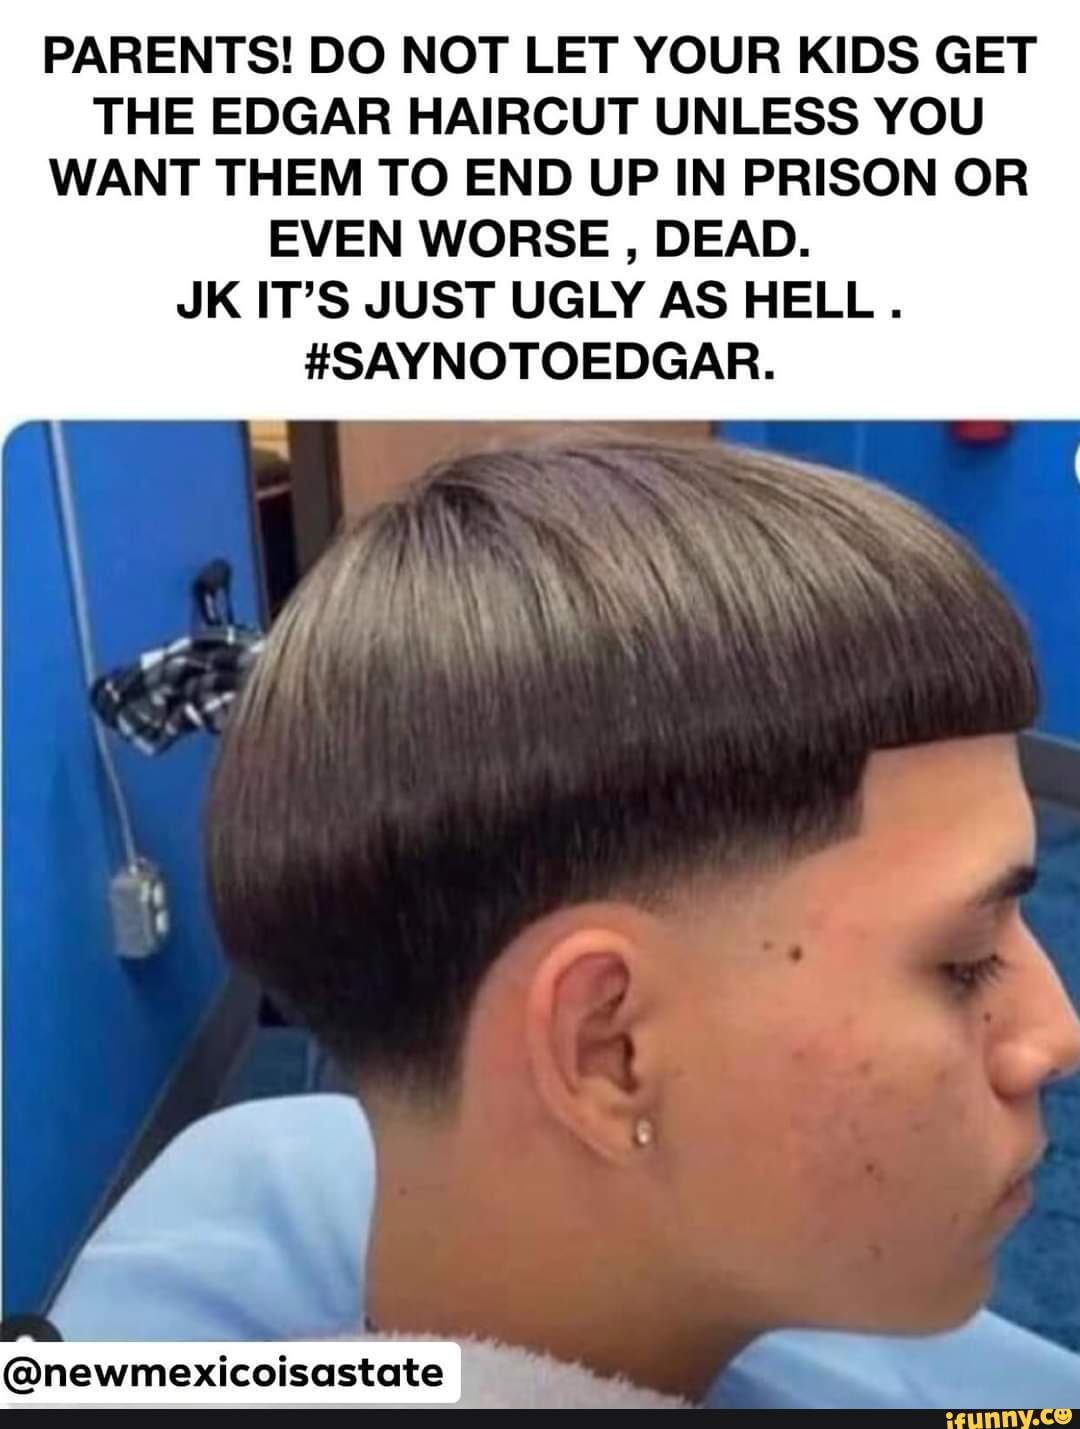 Edgar haircut another thing kids, parents can disagree on